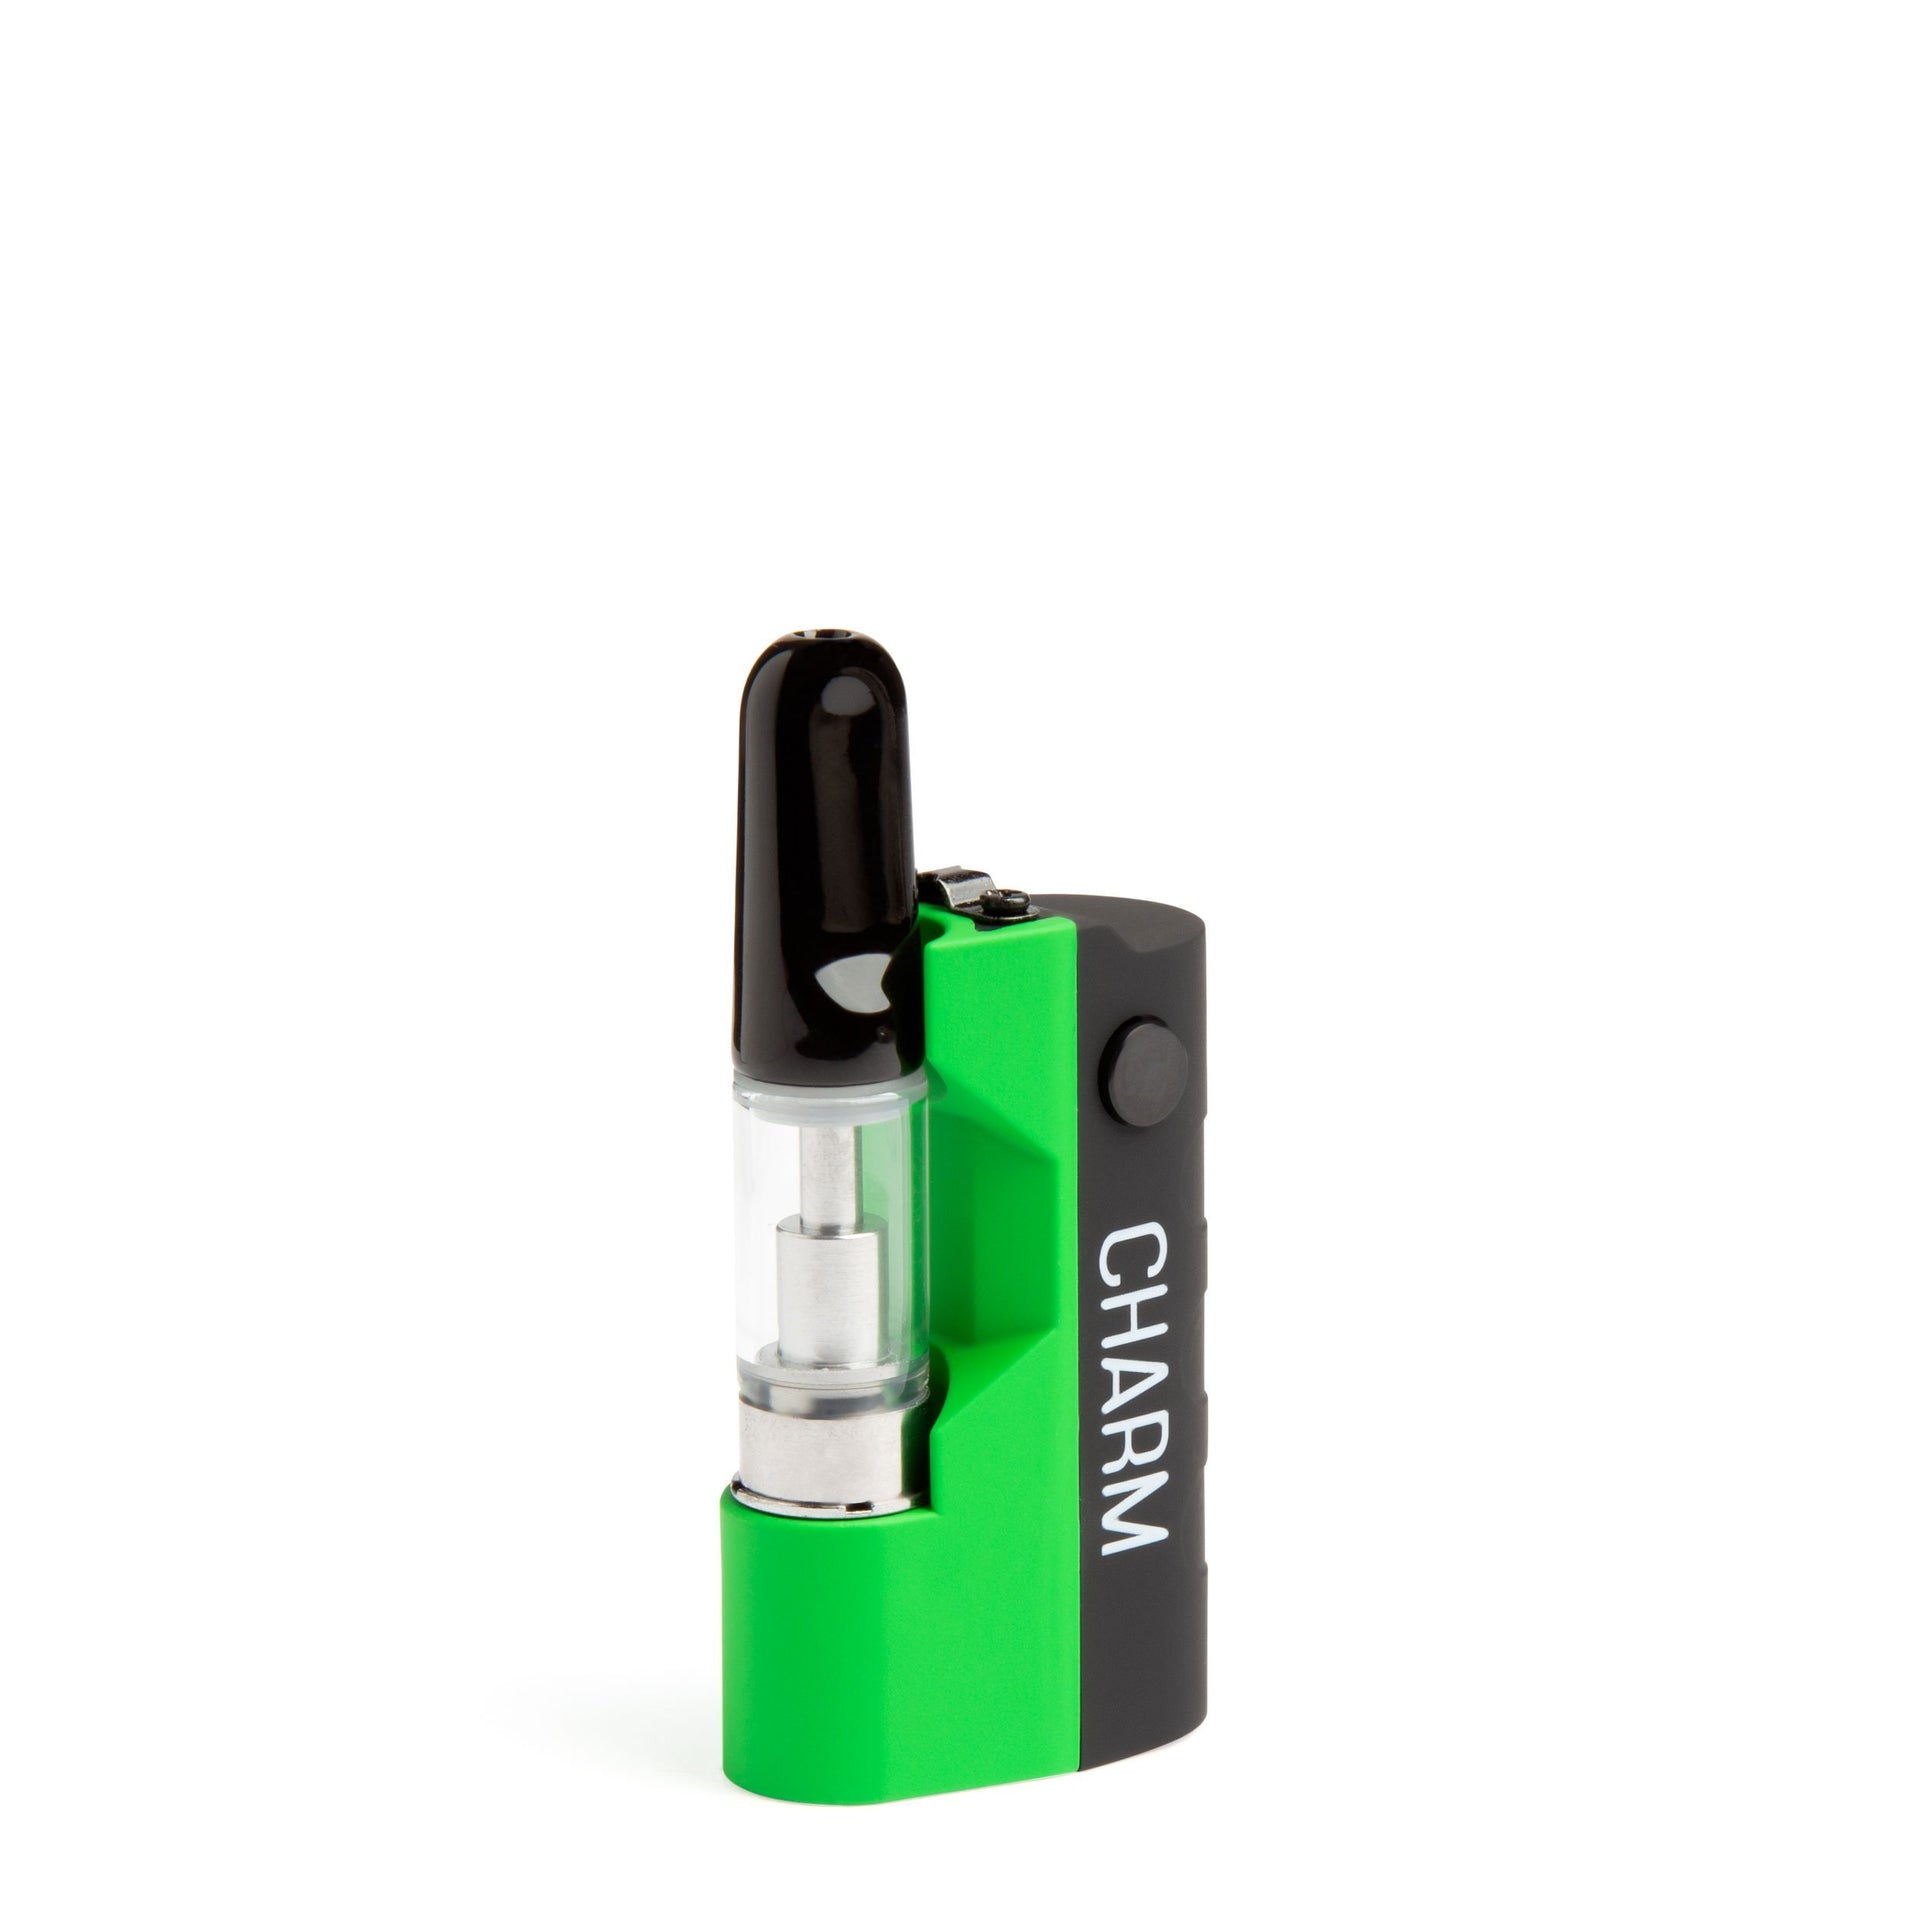 Randy's Charm VV Cartridge Vape Battery - 420 Science - The most trusted online smoke shop.